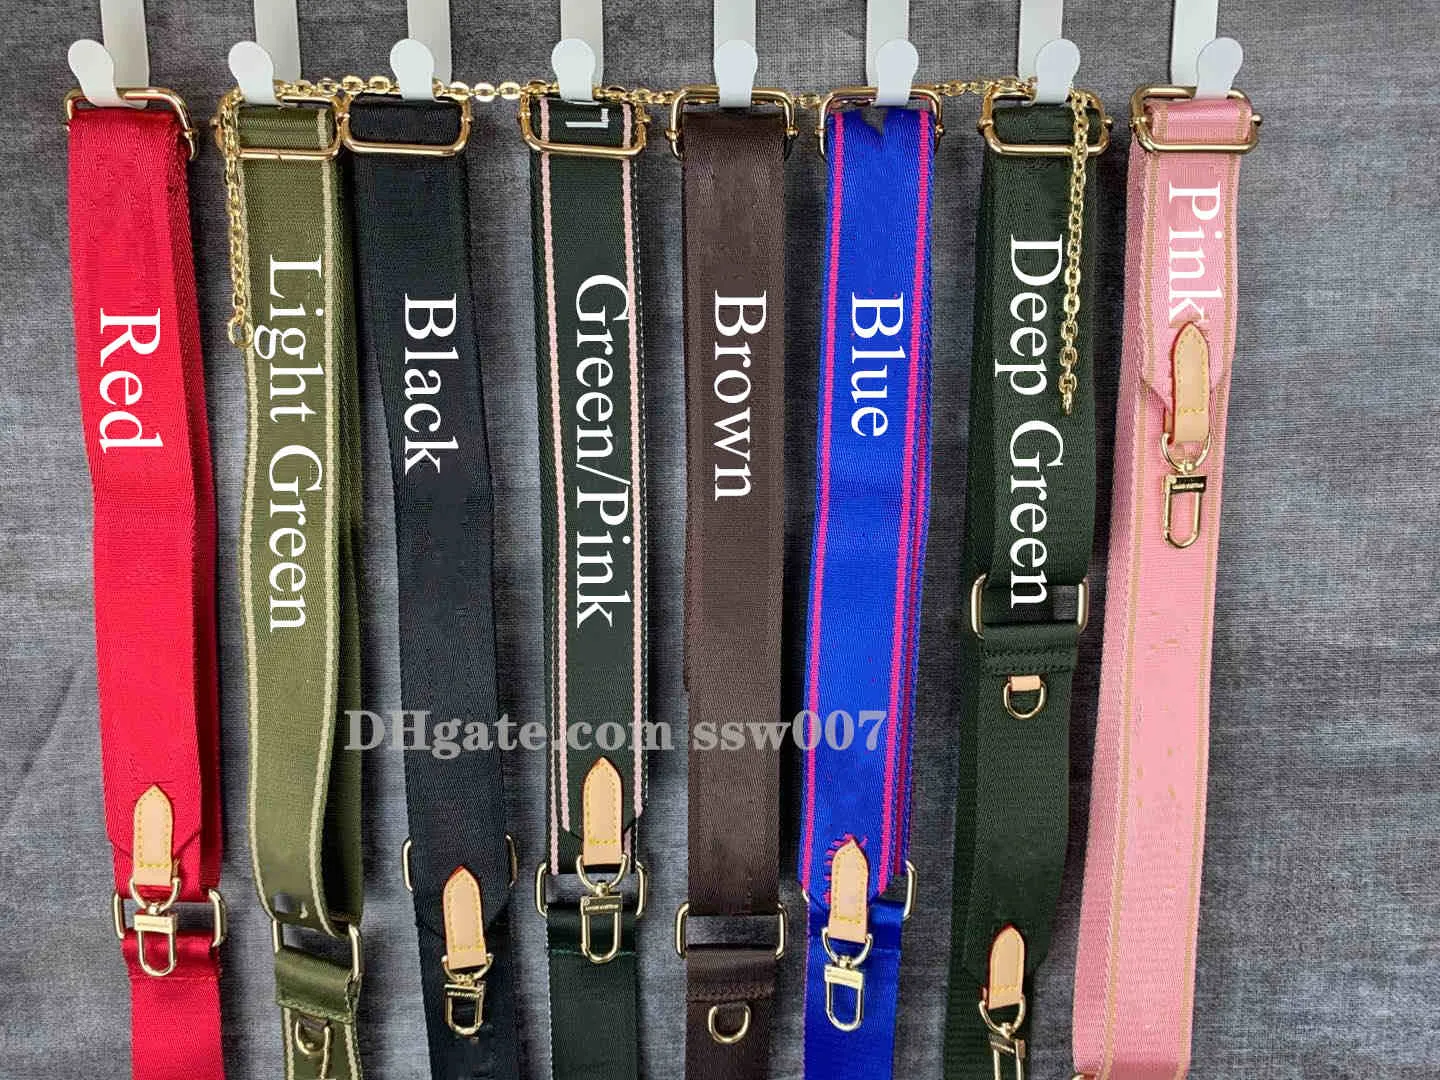 Bag Strap Bagss Sale Shoulder Straps For Set Designers Bags Women Crossbody  Lady Strapss More Color Coin Purse From Ssw007, $13.33